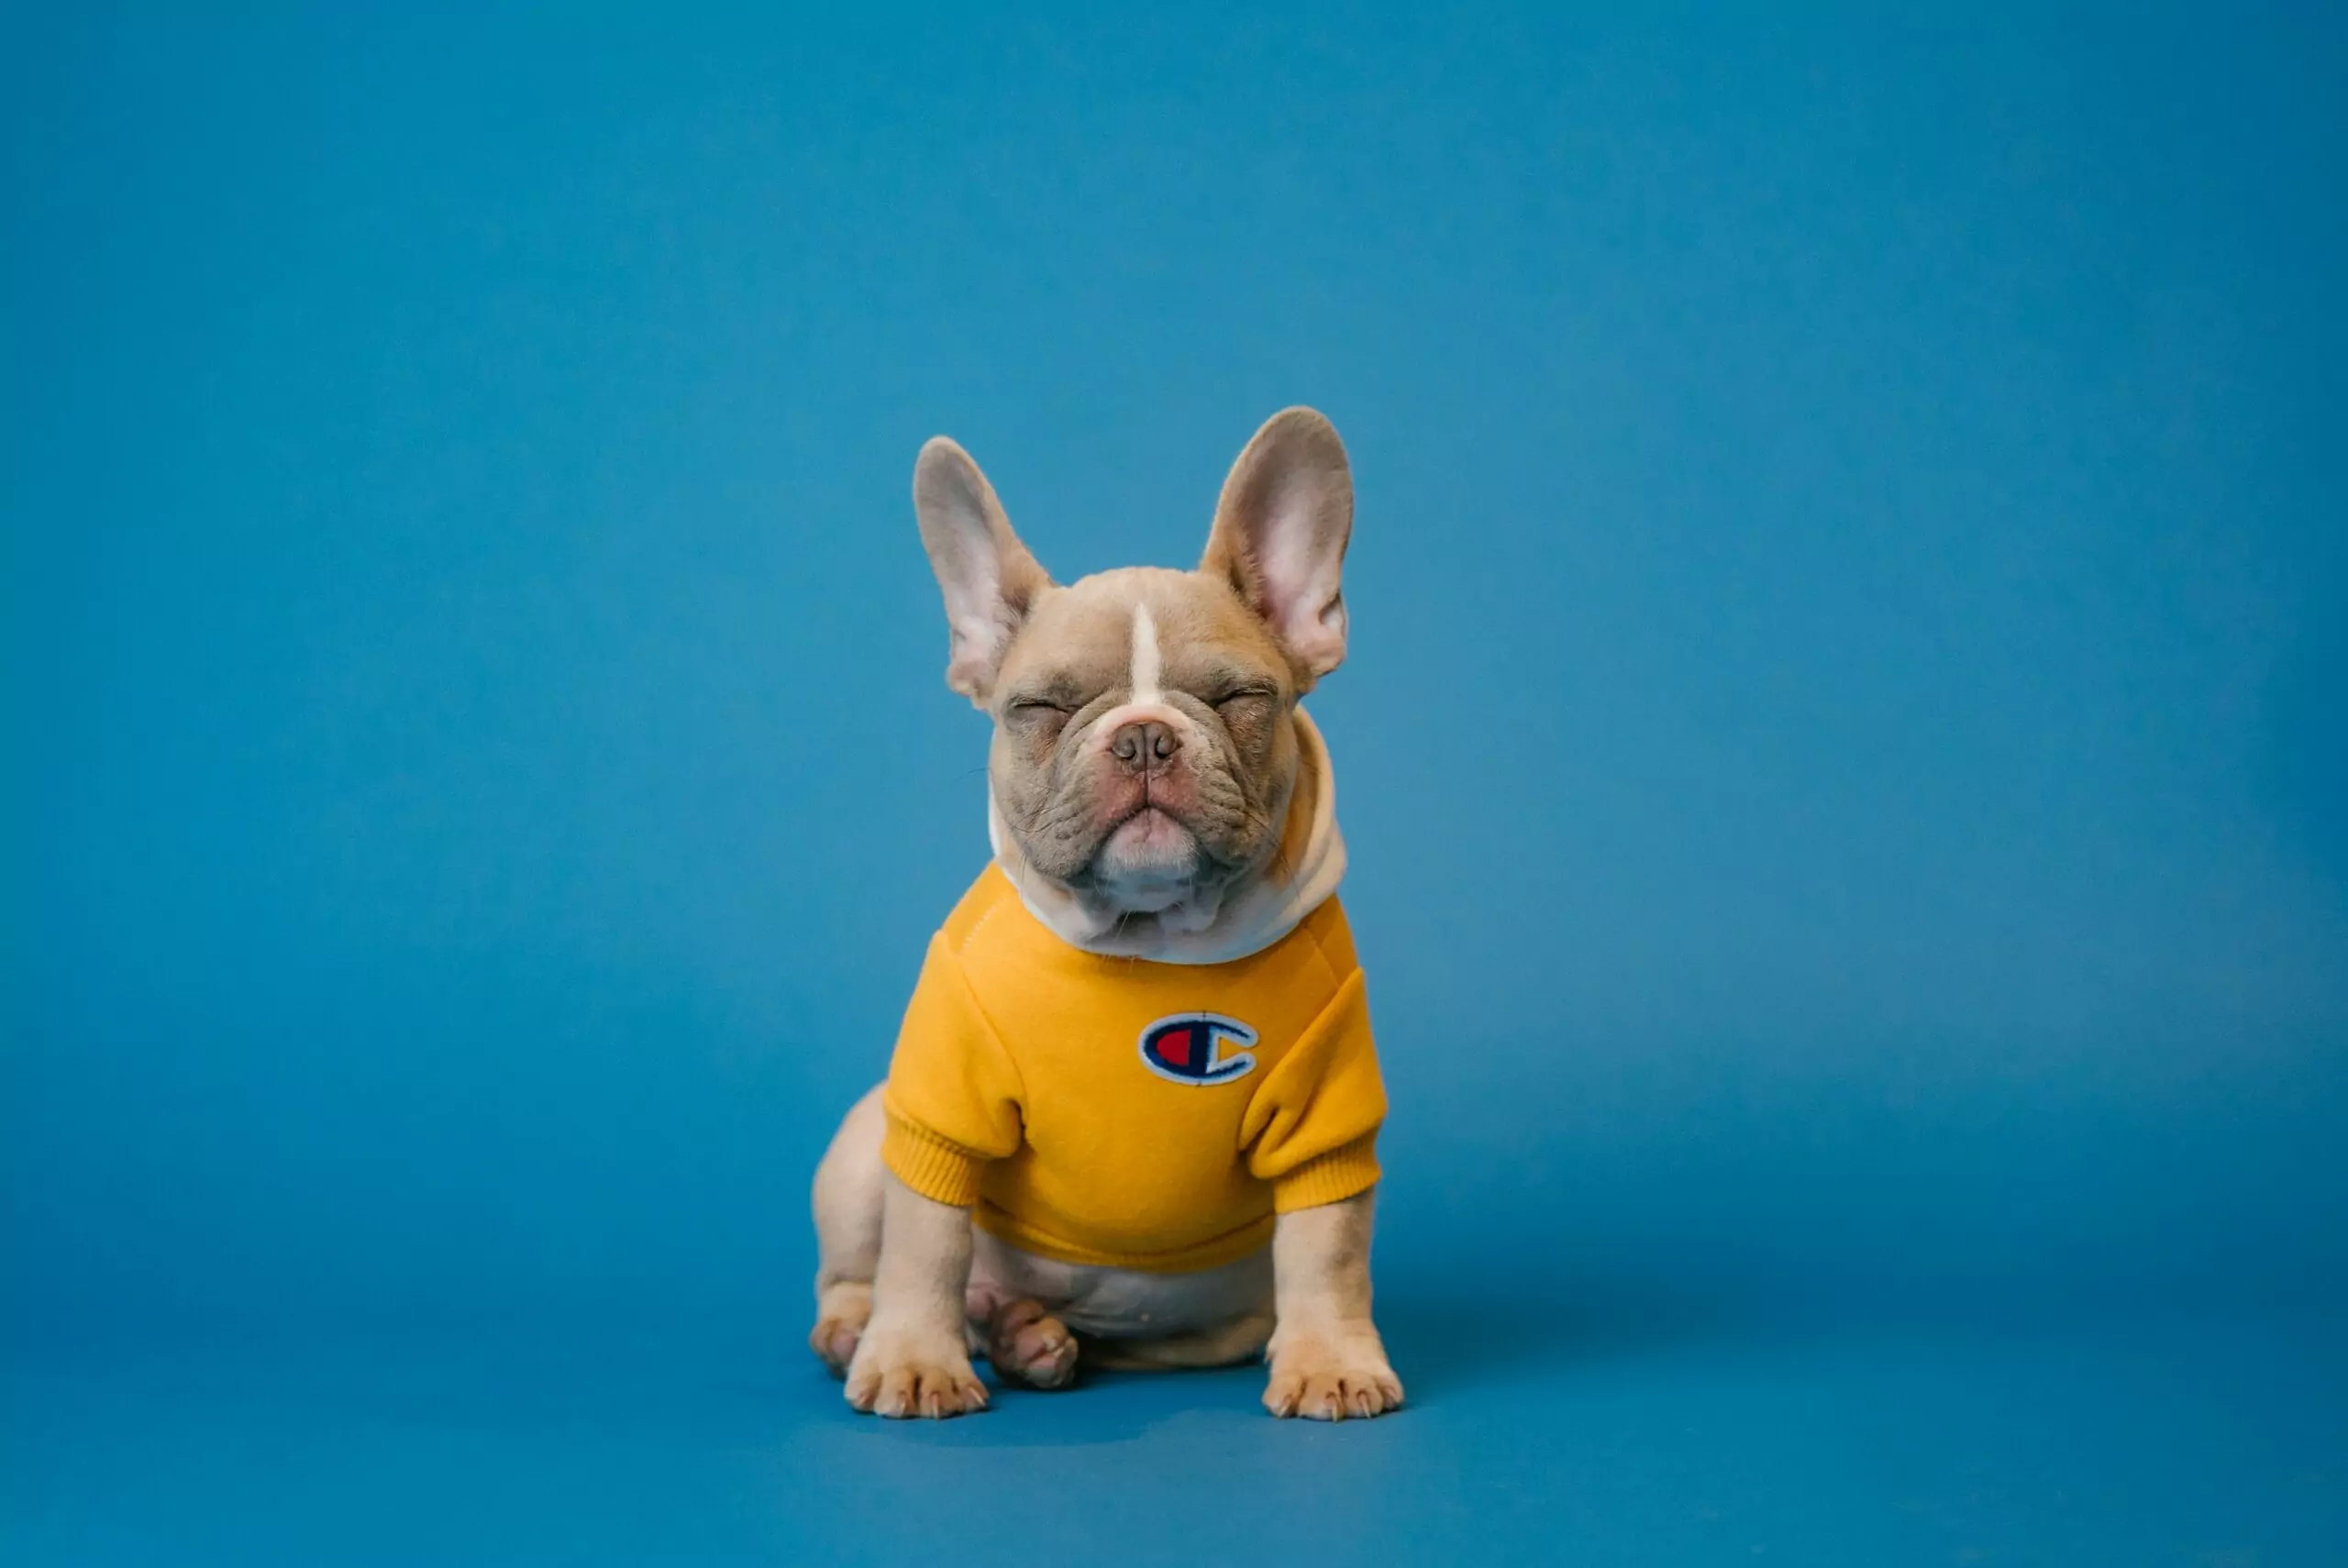 Image of a dog with a yellow jumper on sat in front of a blue screen